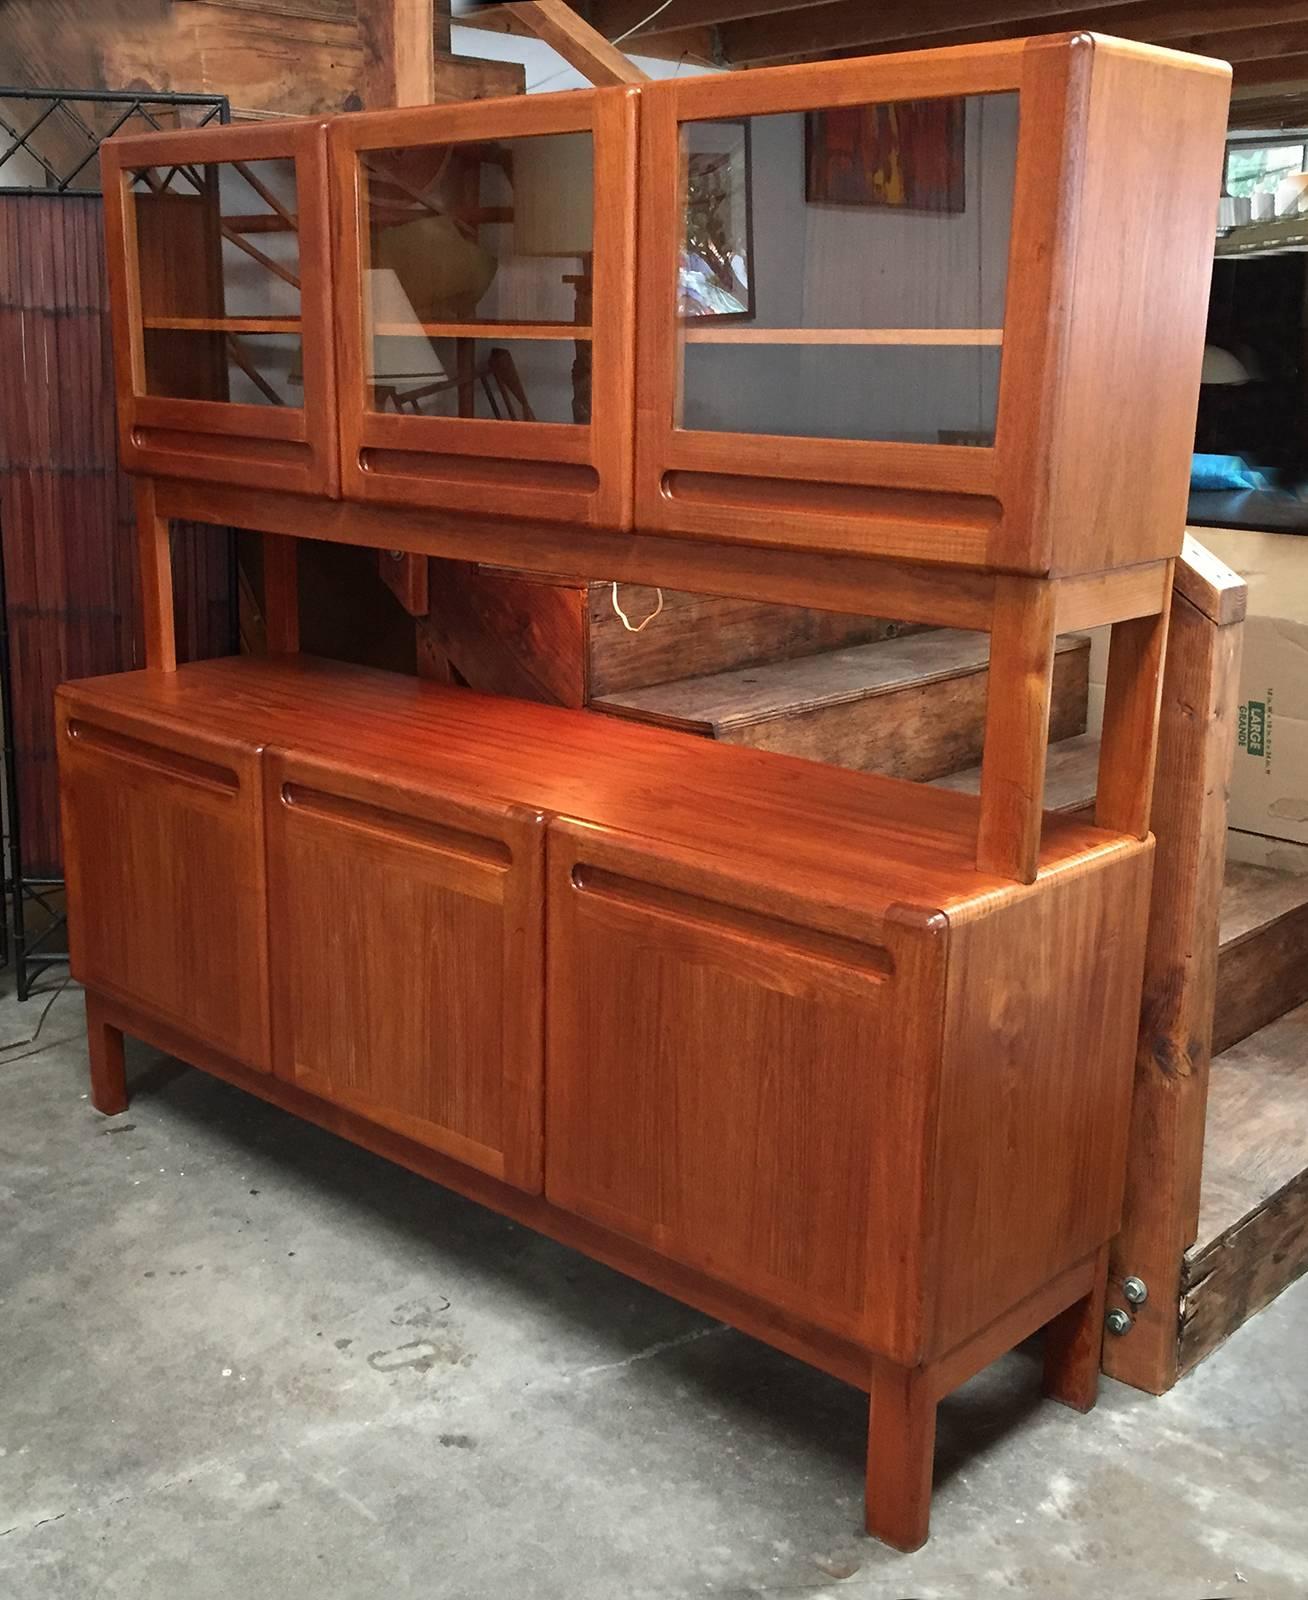 This a stacking Danish modern credenza and vitrine in teak. The piece has very modern lines and is finished with soft round edges. Both the vitrine and credenza are designed with built-in pulls. The vitrine features three individually adjustable